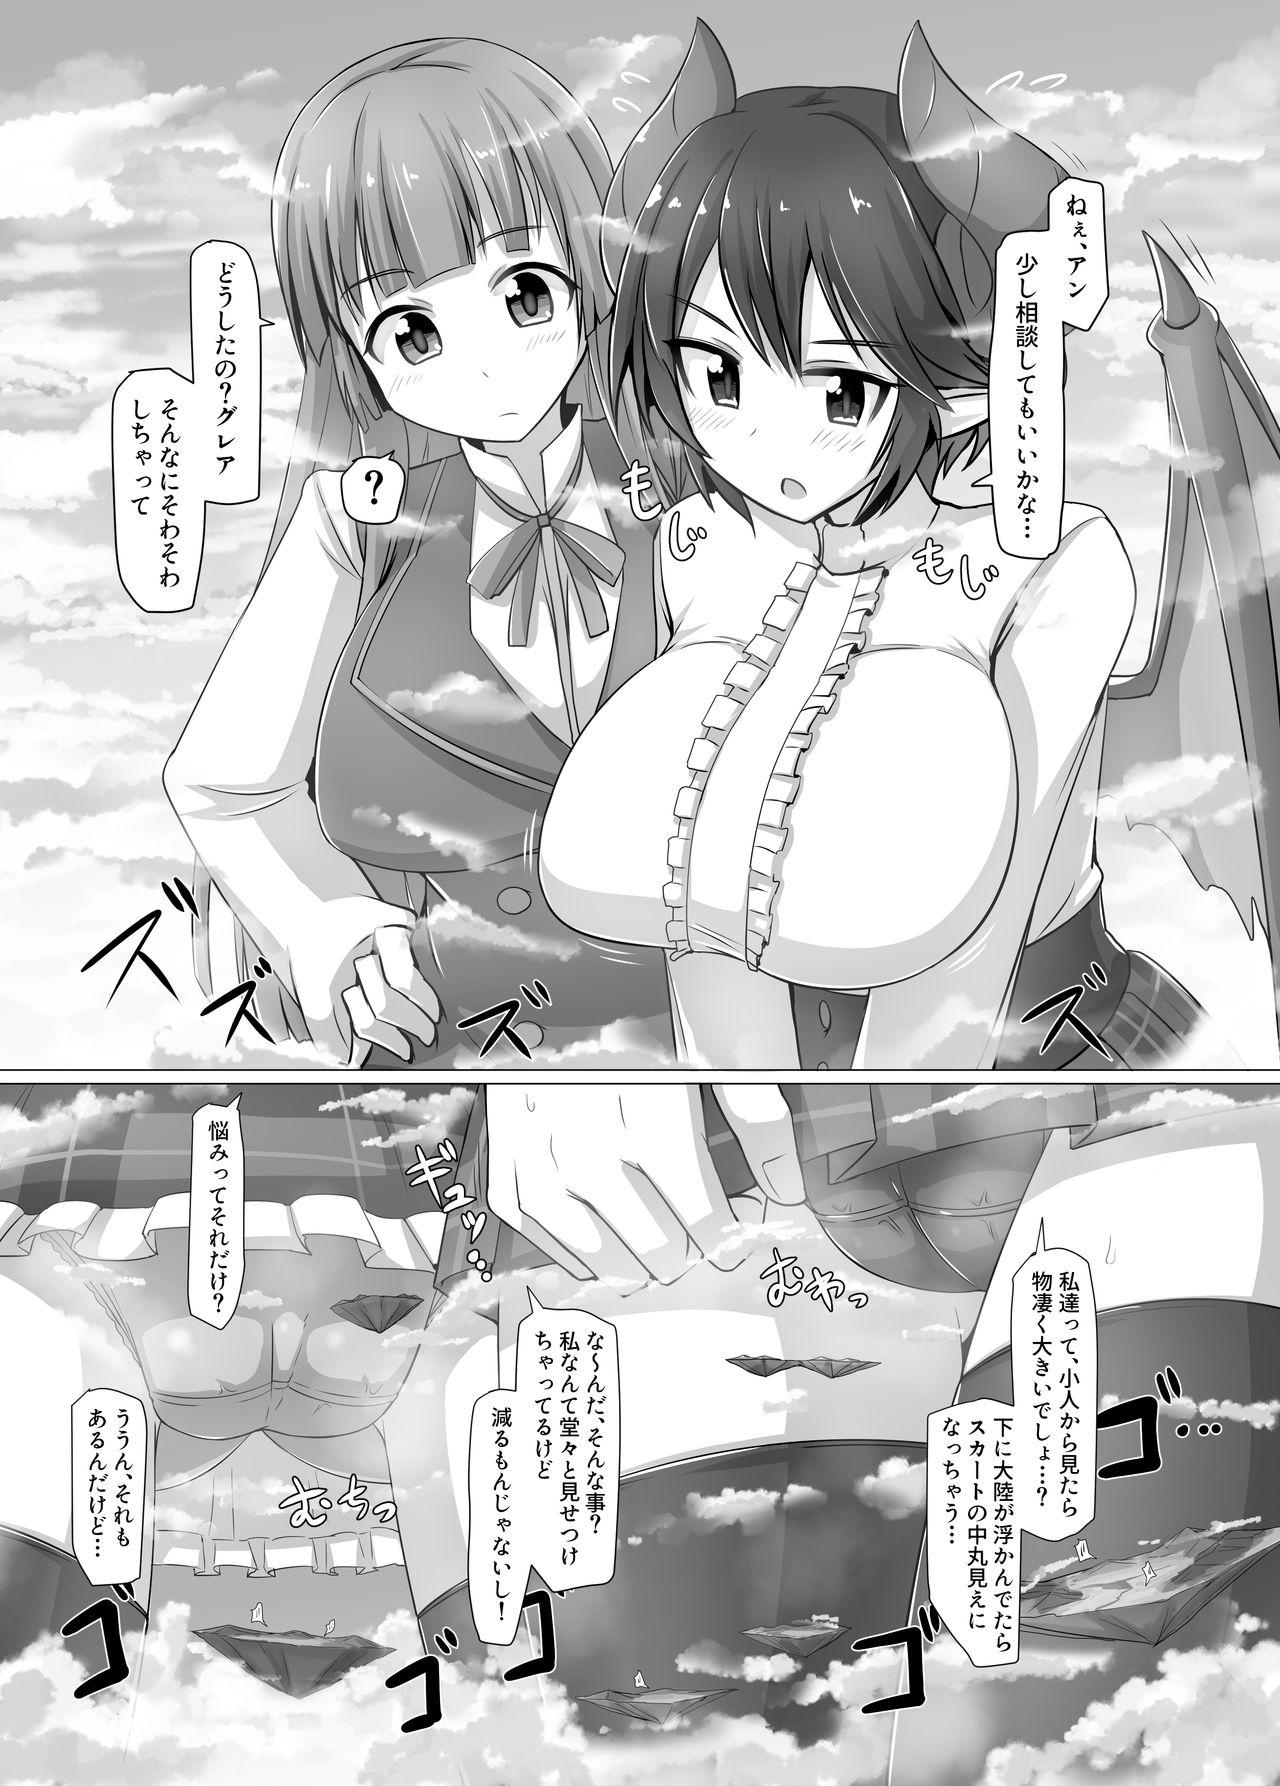 Gay Public Gigantic Gas Situation - Rage of bahamut Manaria friends Mama - Page 2